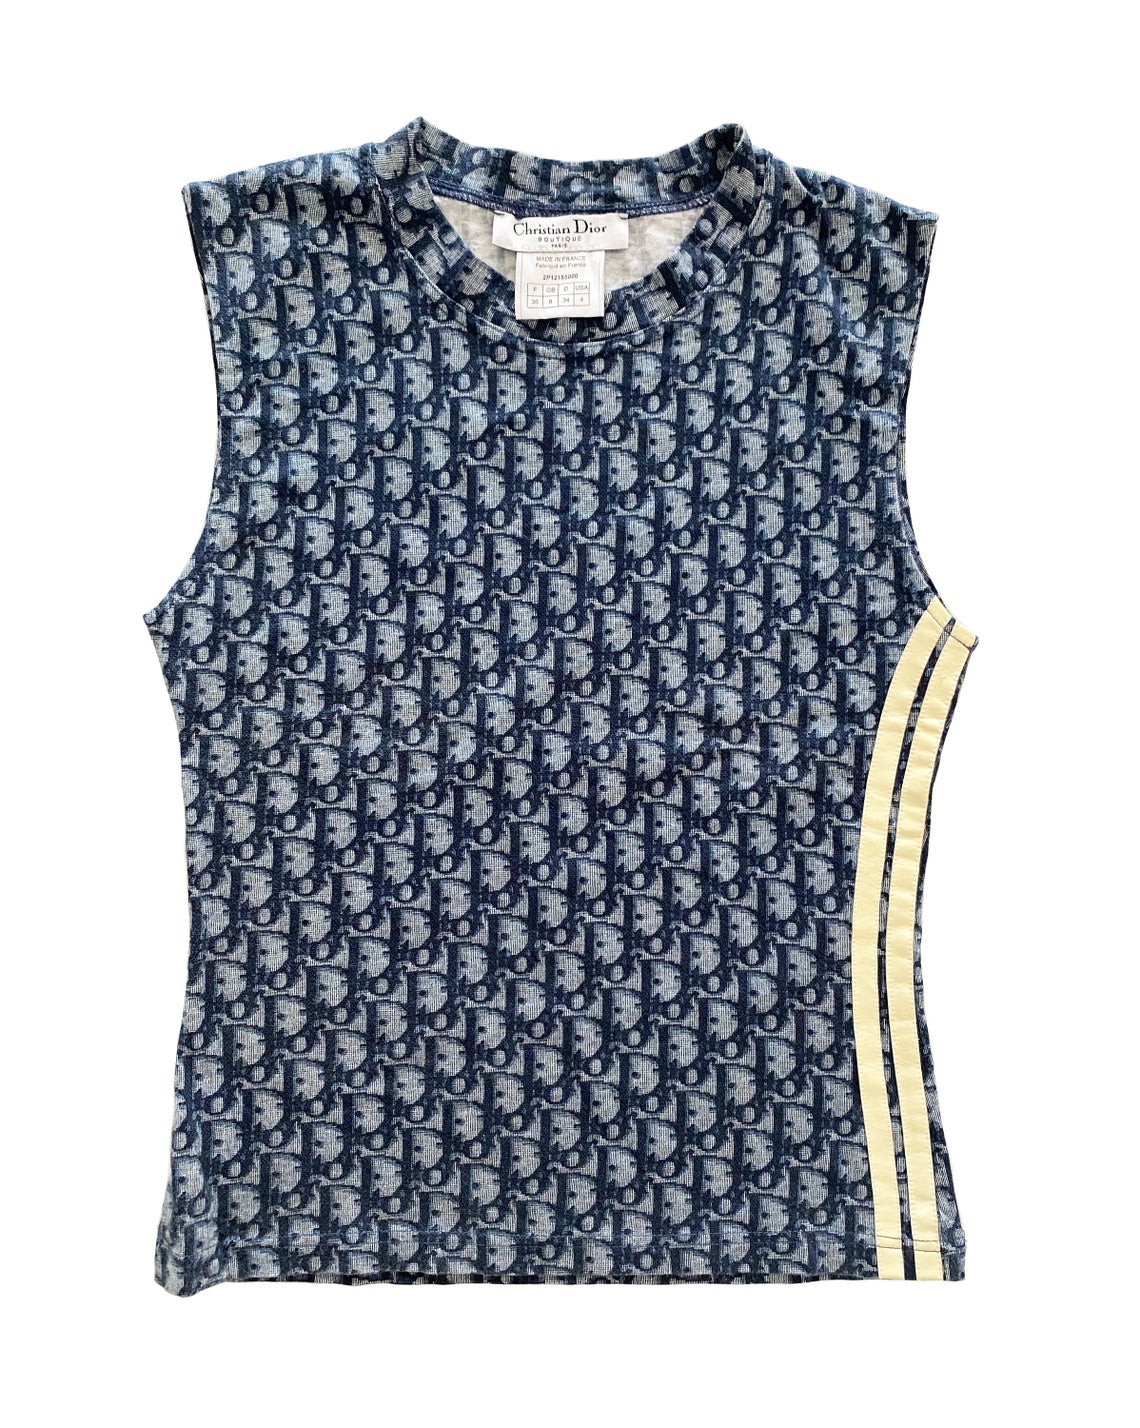 Fruit Vintage Christian Dior logo tank is about as iconic as it gets. Inspired by the original Dior monogram canvas luggage and accessories, and re-released under the creative direction of John Galliano, this tank top is a collectors dream.